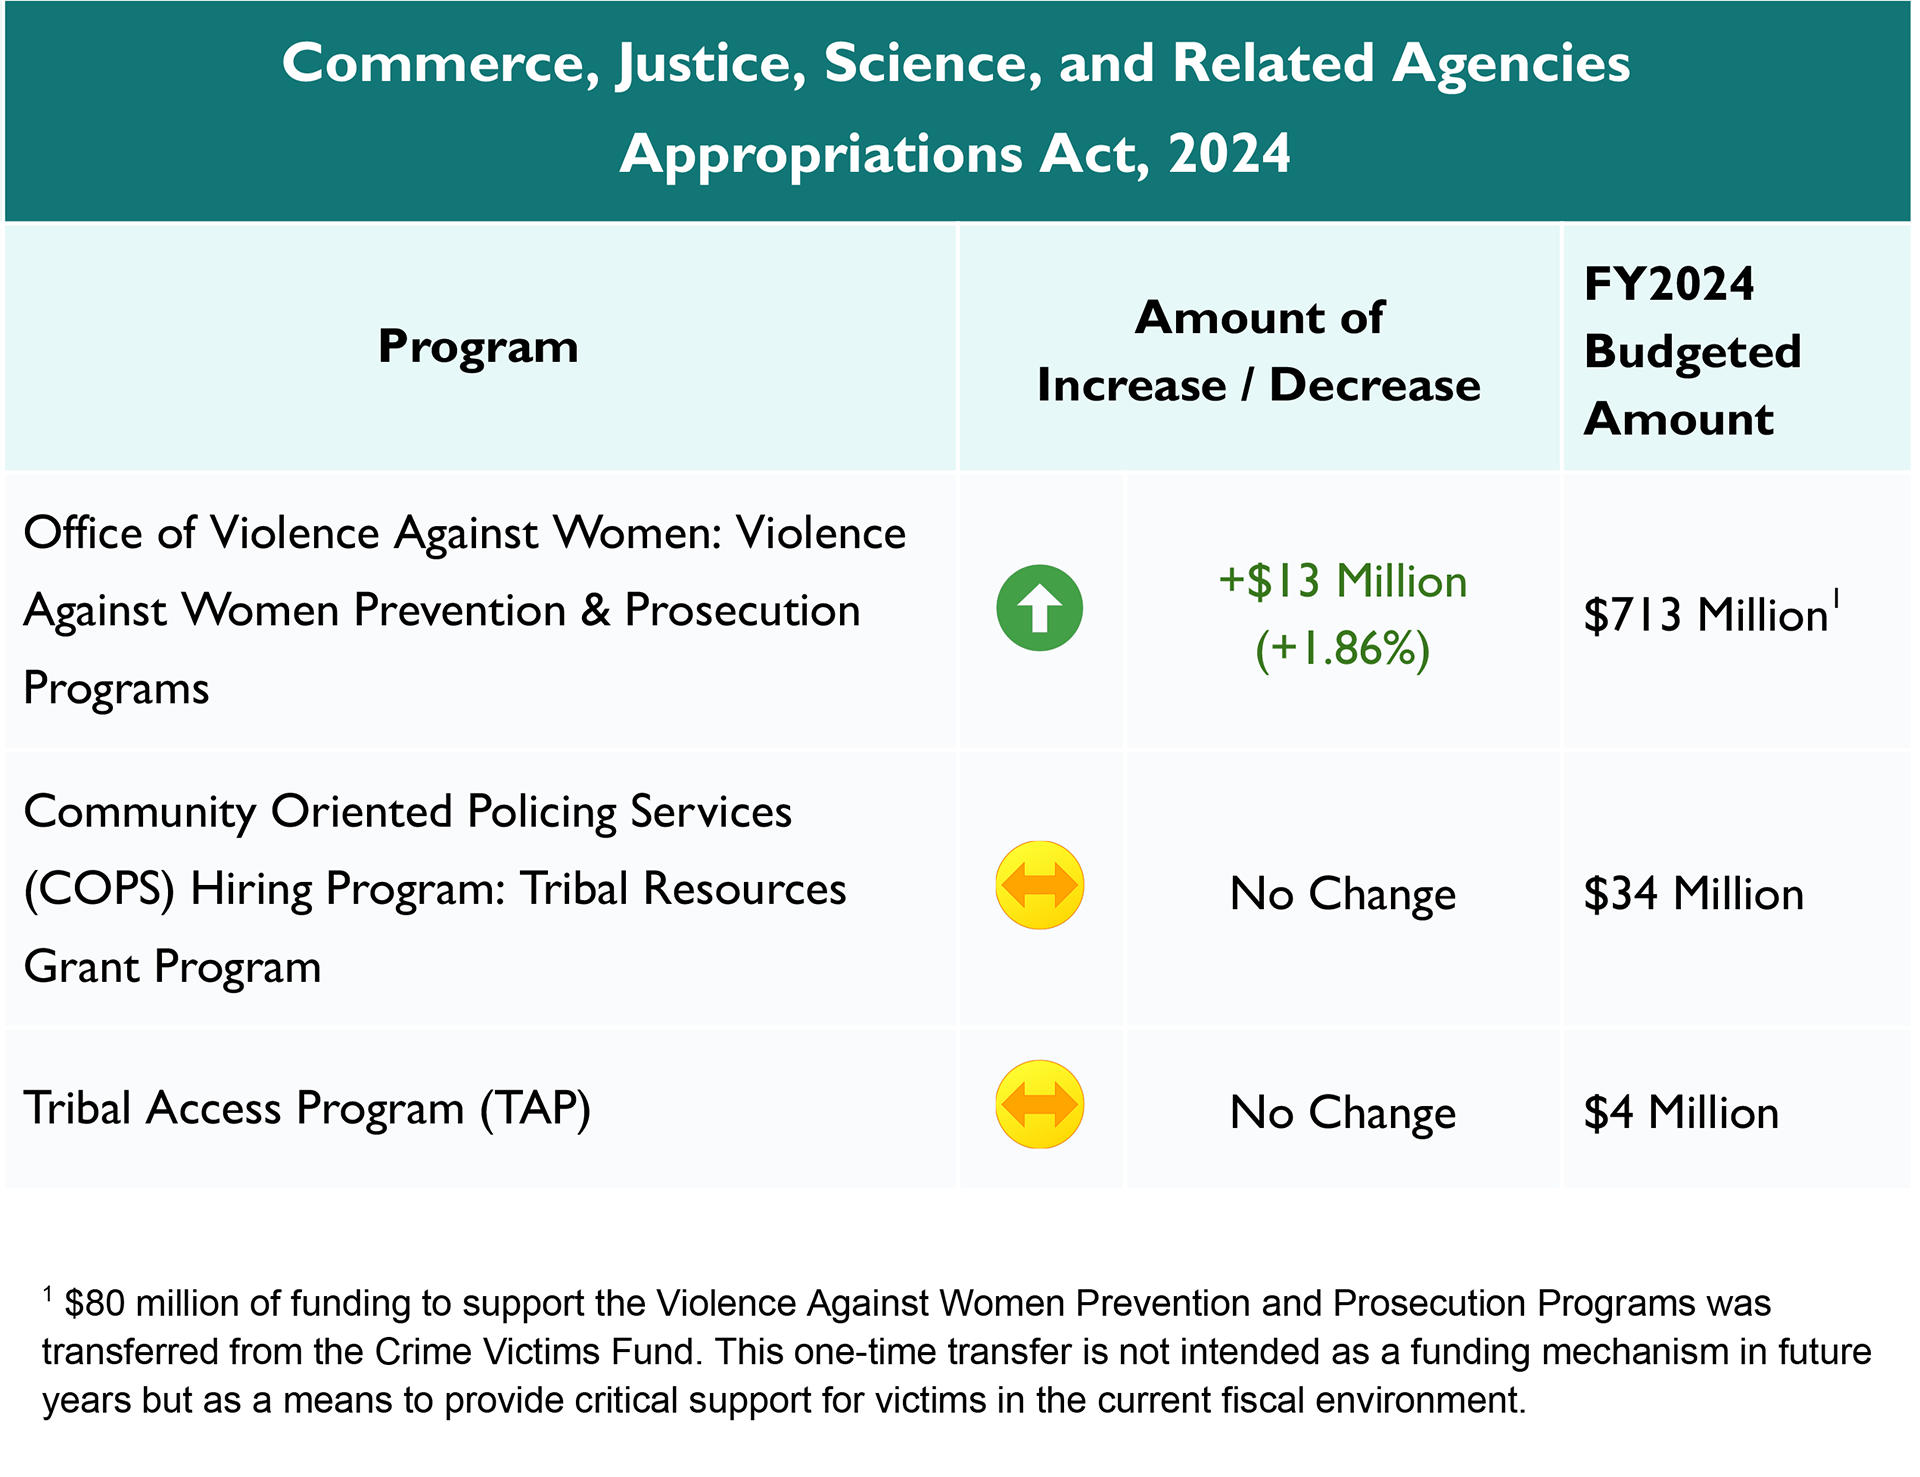 Commerce, Justice, Science, and Related Agencies Appropriations Act, 2024